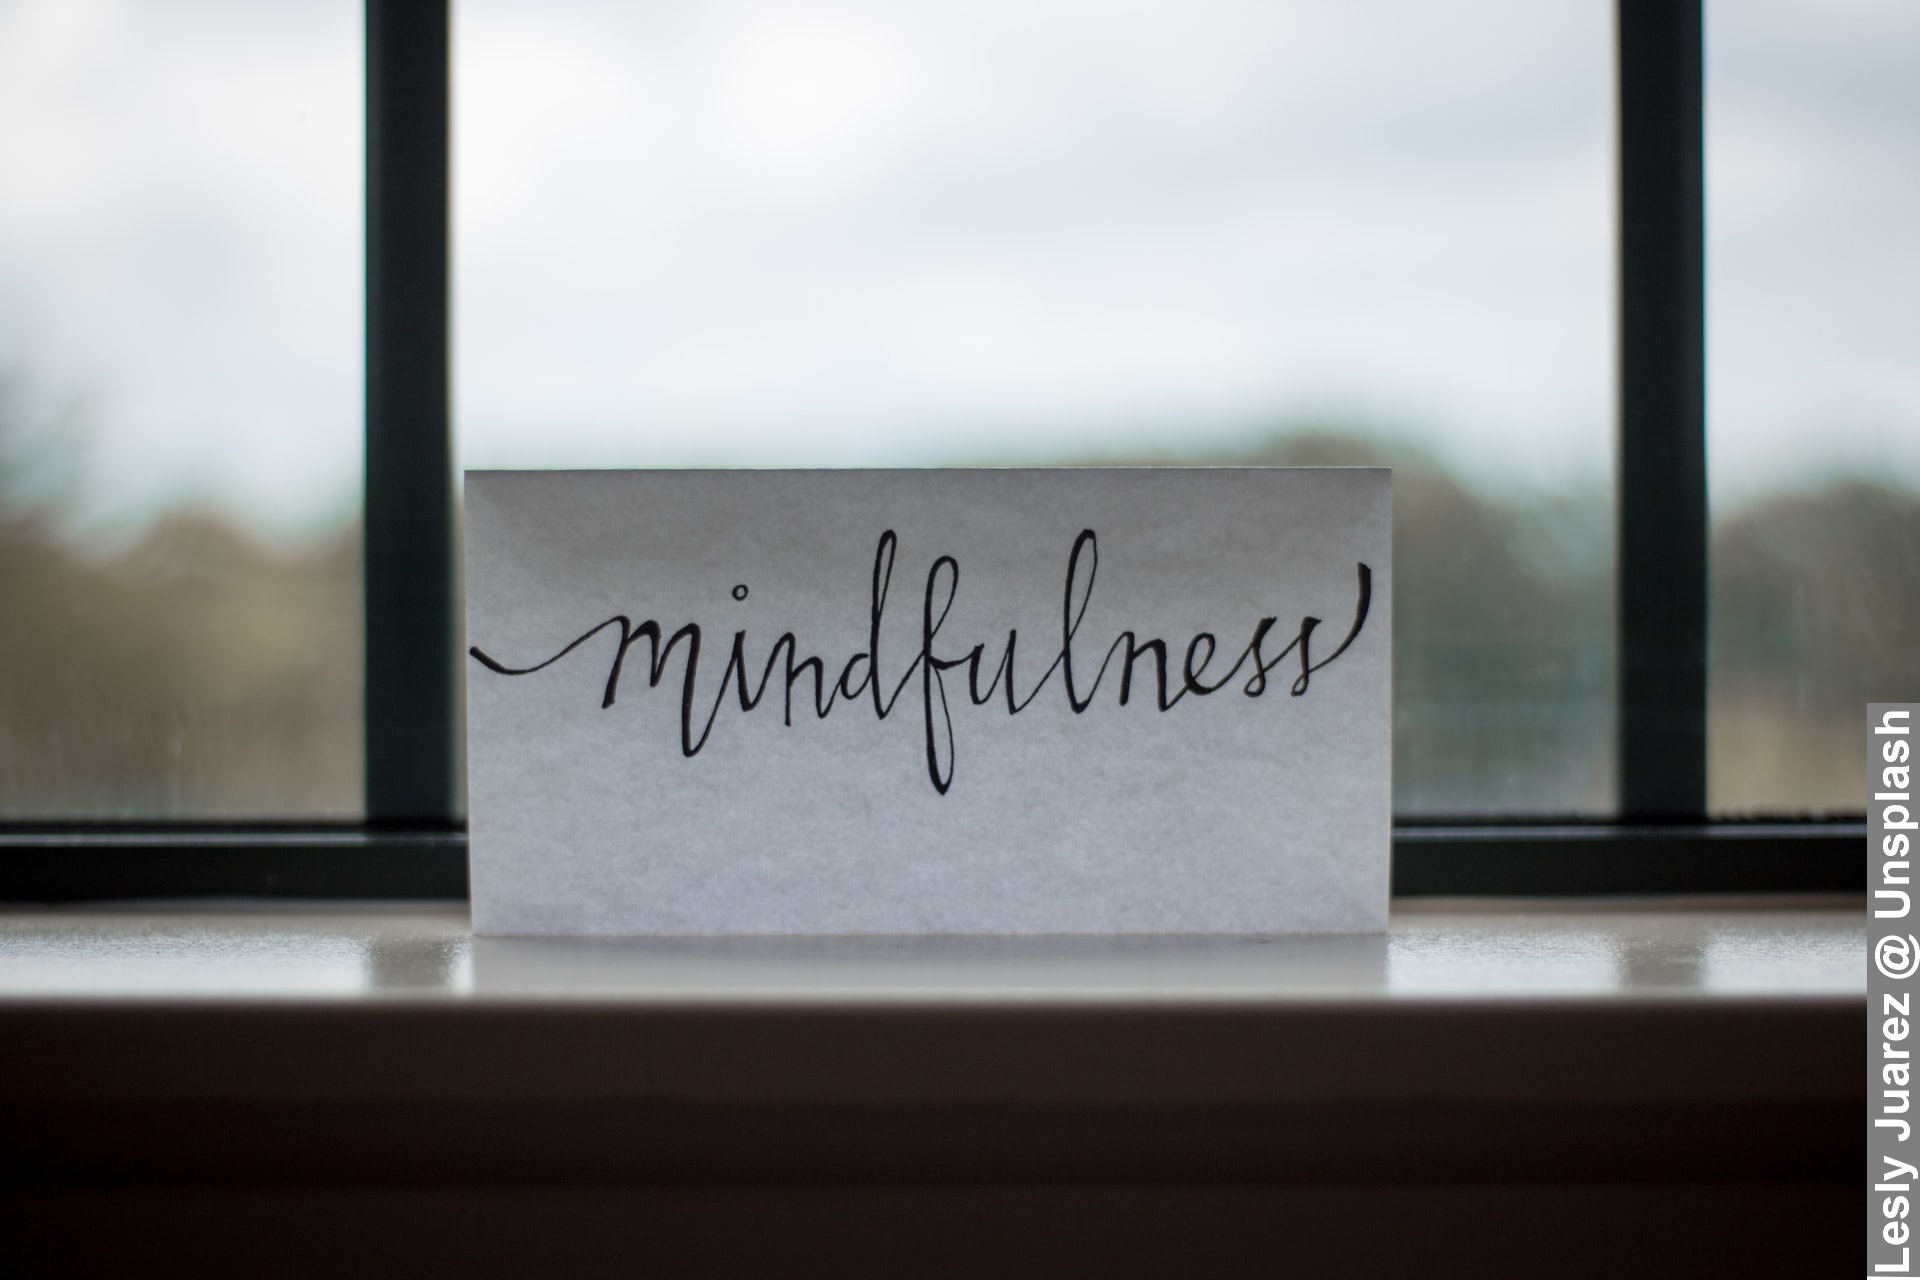 Practice mindfulness and Wellness in words by window